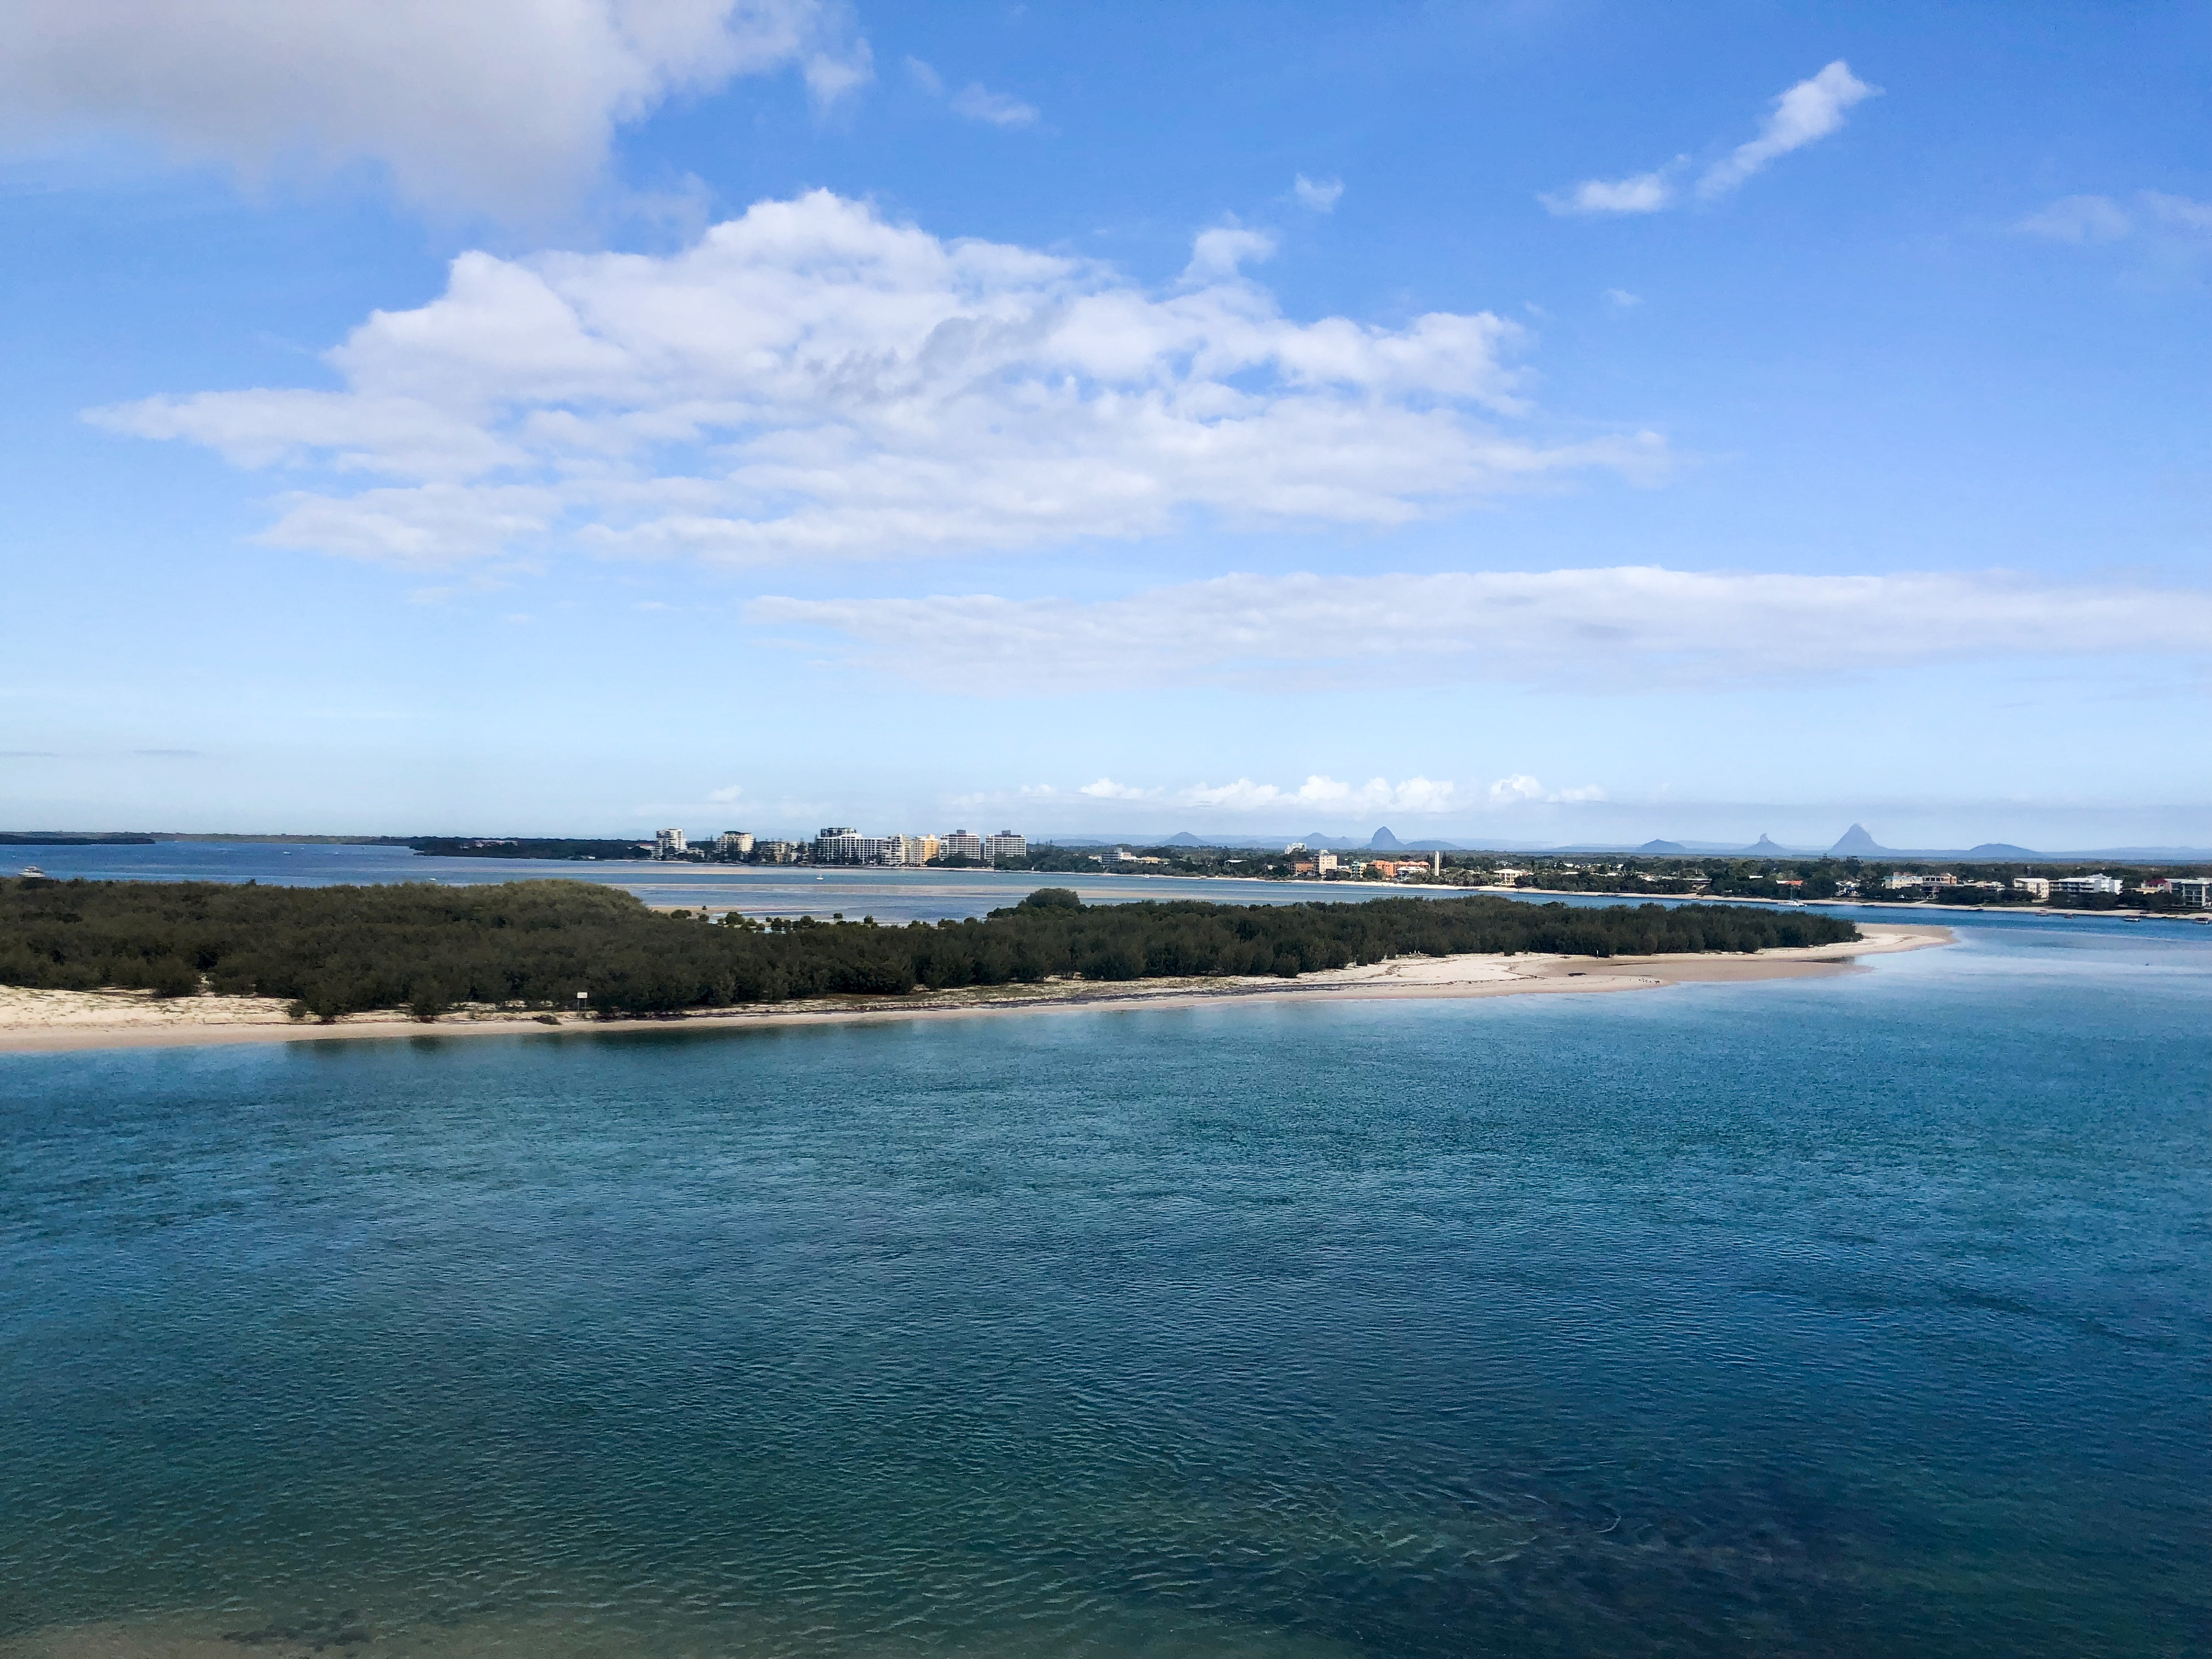 View of Bribie Island from Caloundra with the Glass House Mountains in the distance